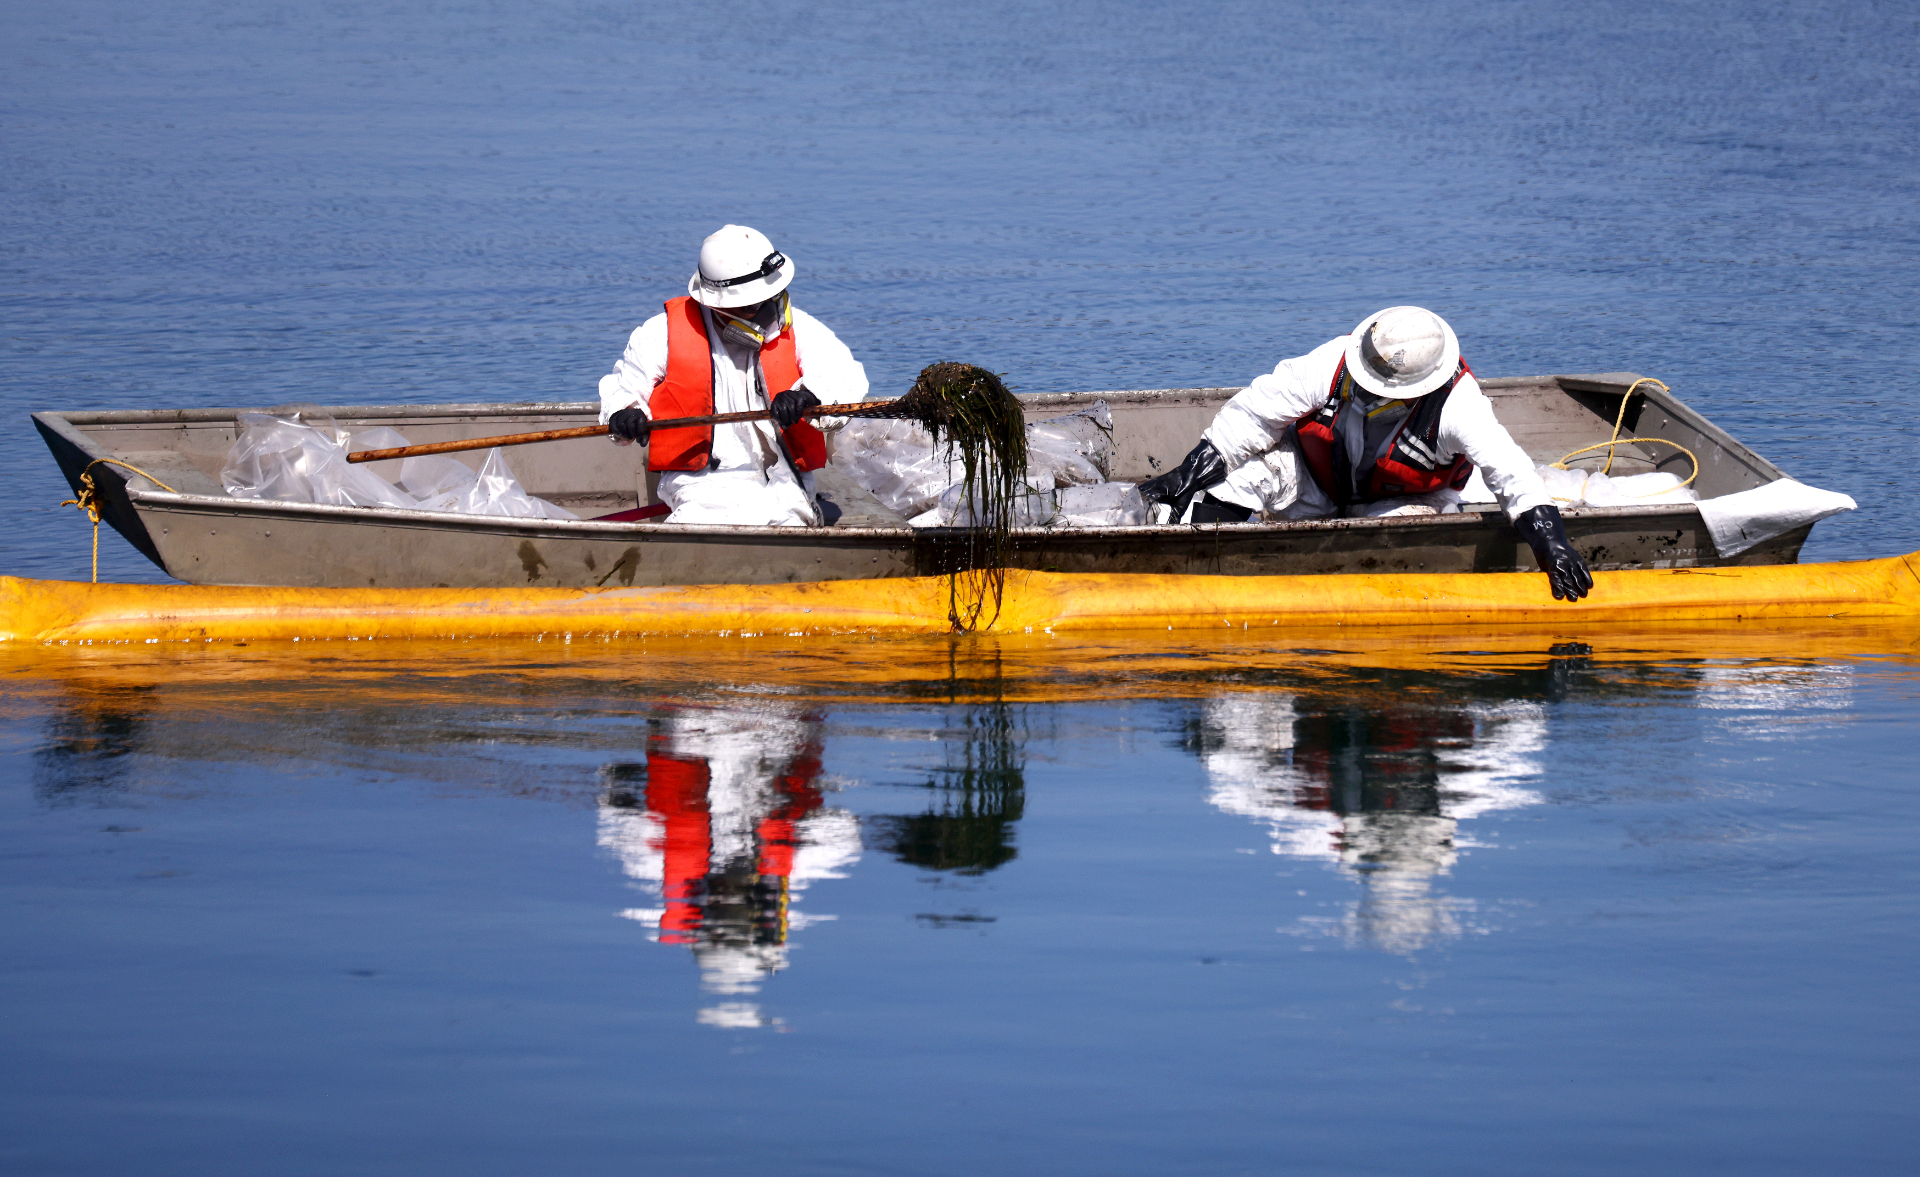 Two people dressed in white hazmat suits and life vests sit in a boat, one wielding a long tool and picking up oil-covered seaweed from the water.